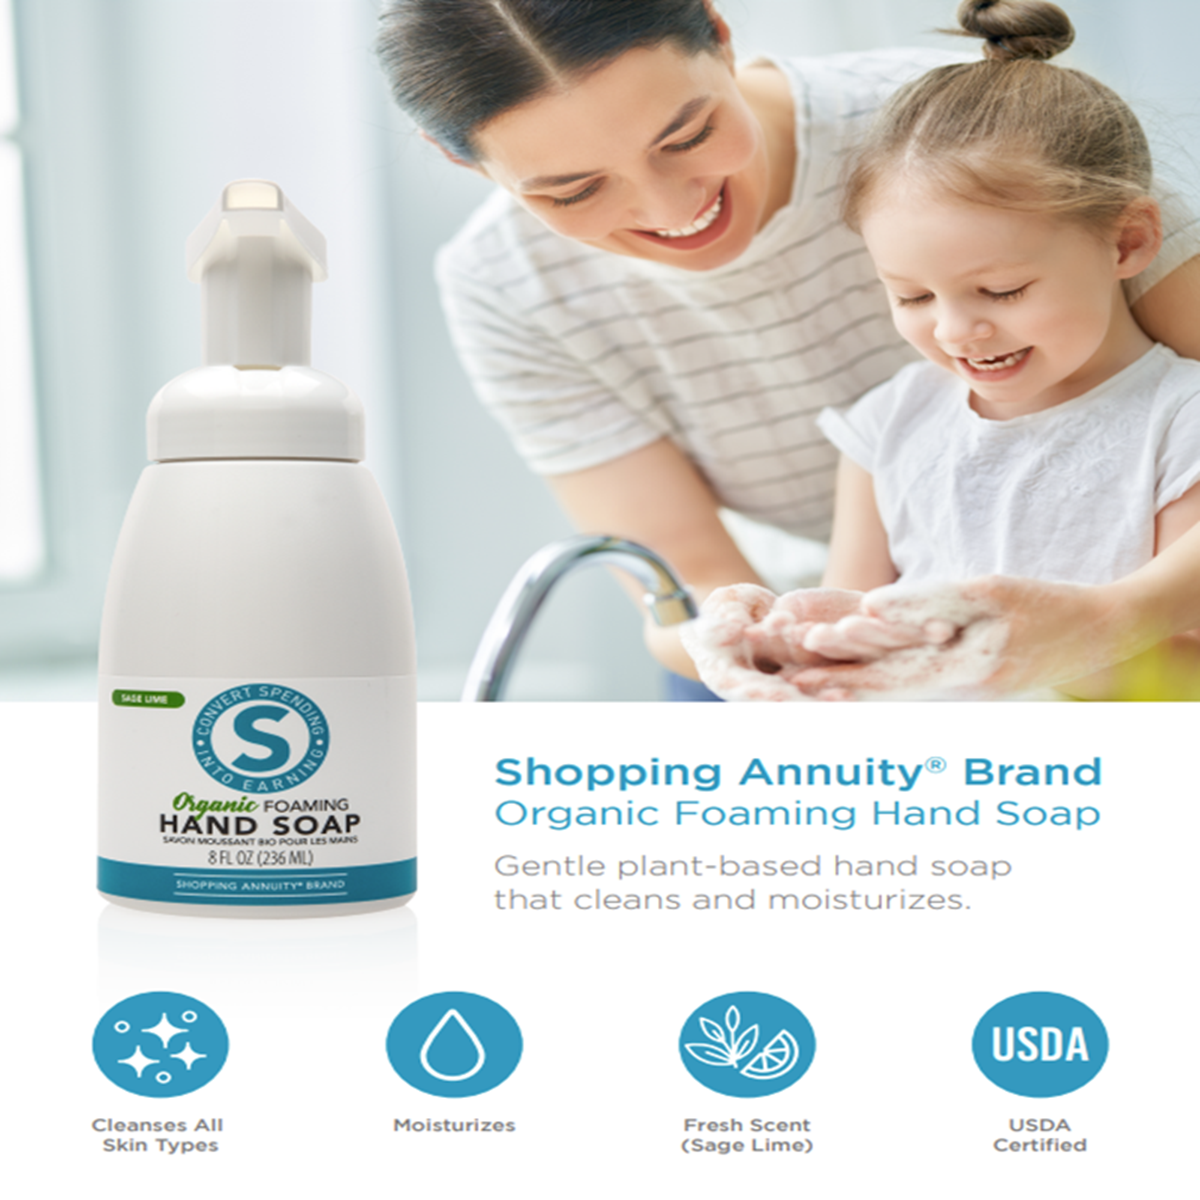 What Makes Shopping Annuity Brand Organic Foaming Hand Soap Unique?